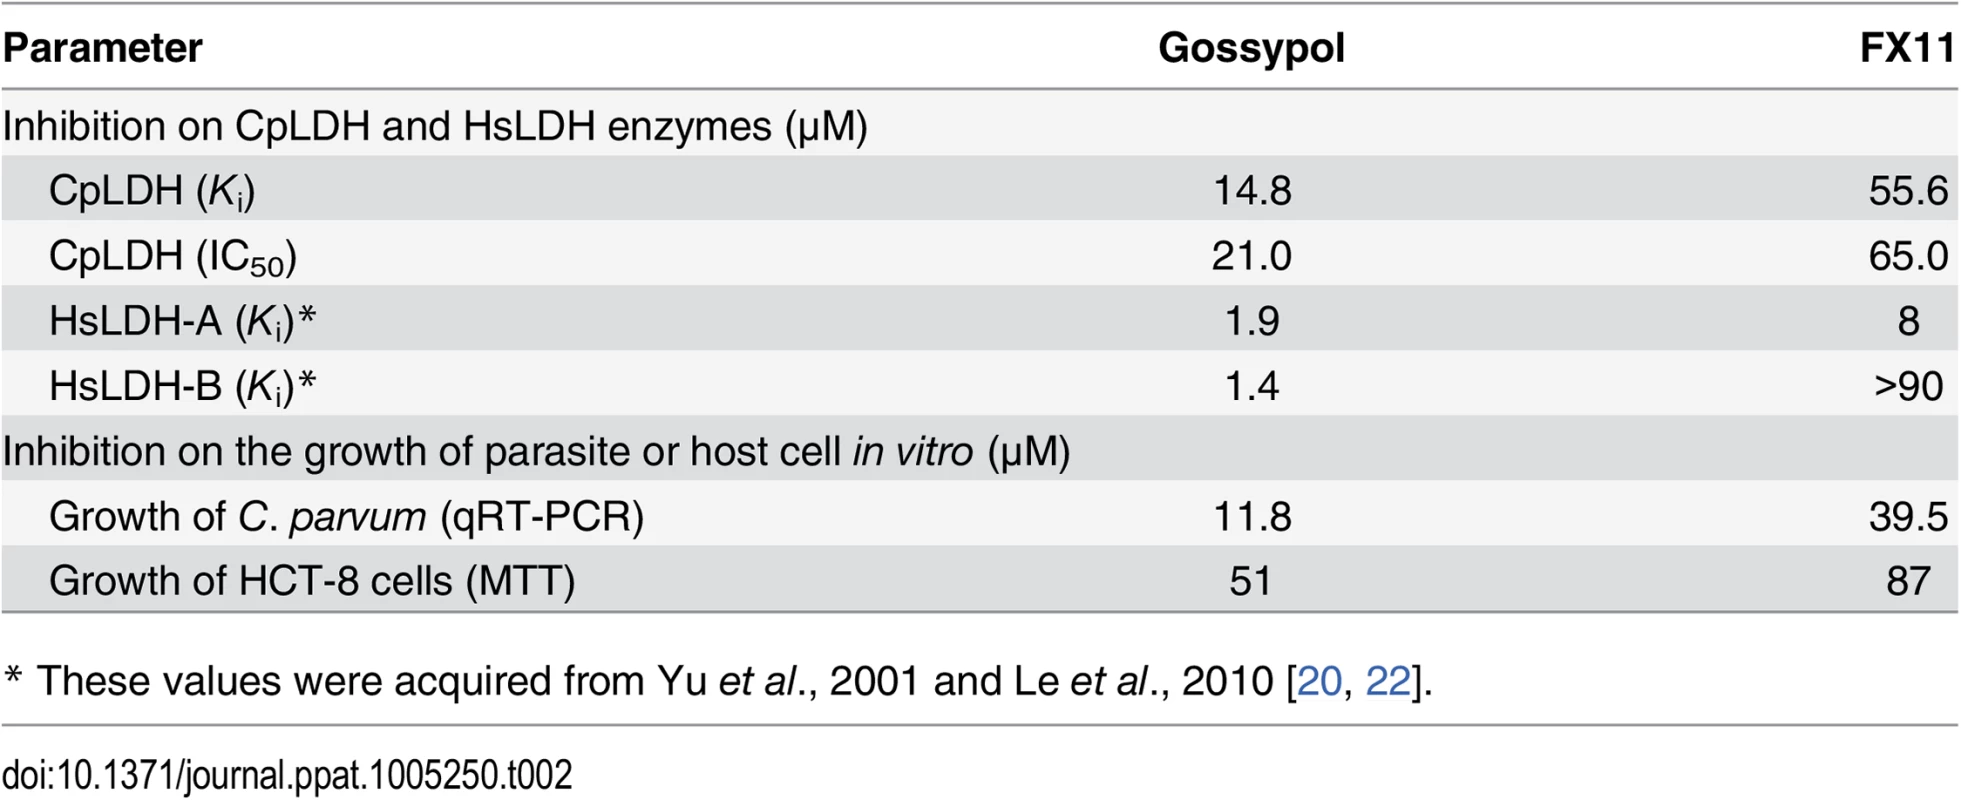 Inhibition constants and anti-cryptosporidial activities of gossypol and FX11.